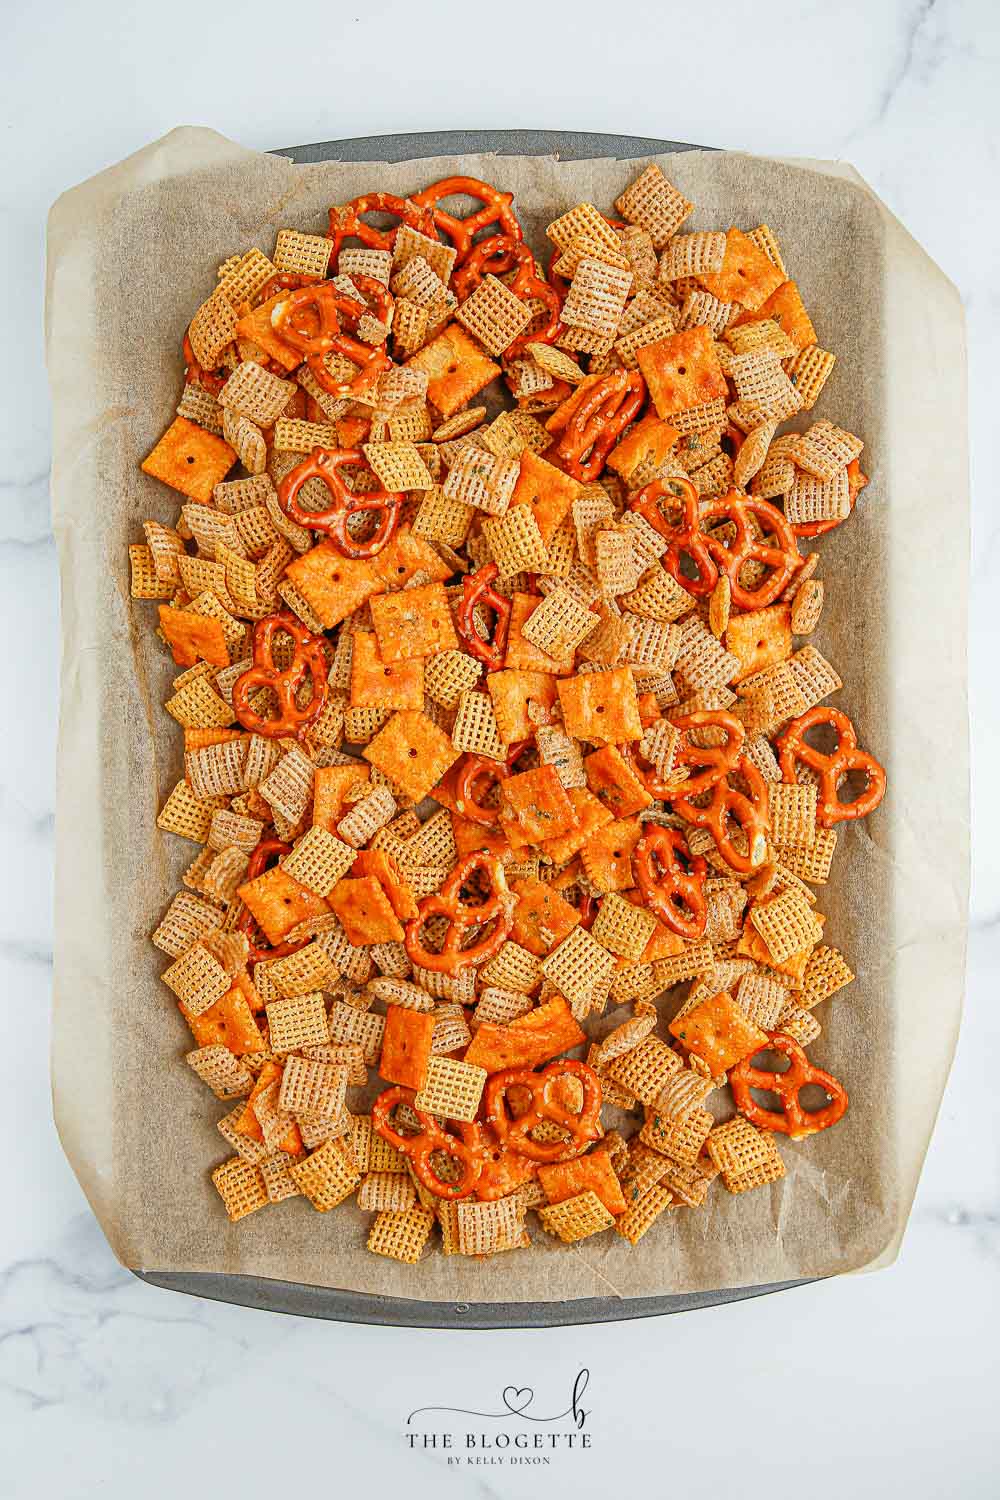 Mix on baking tray with parchment paper